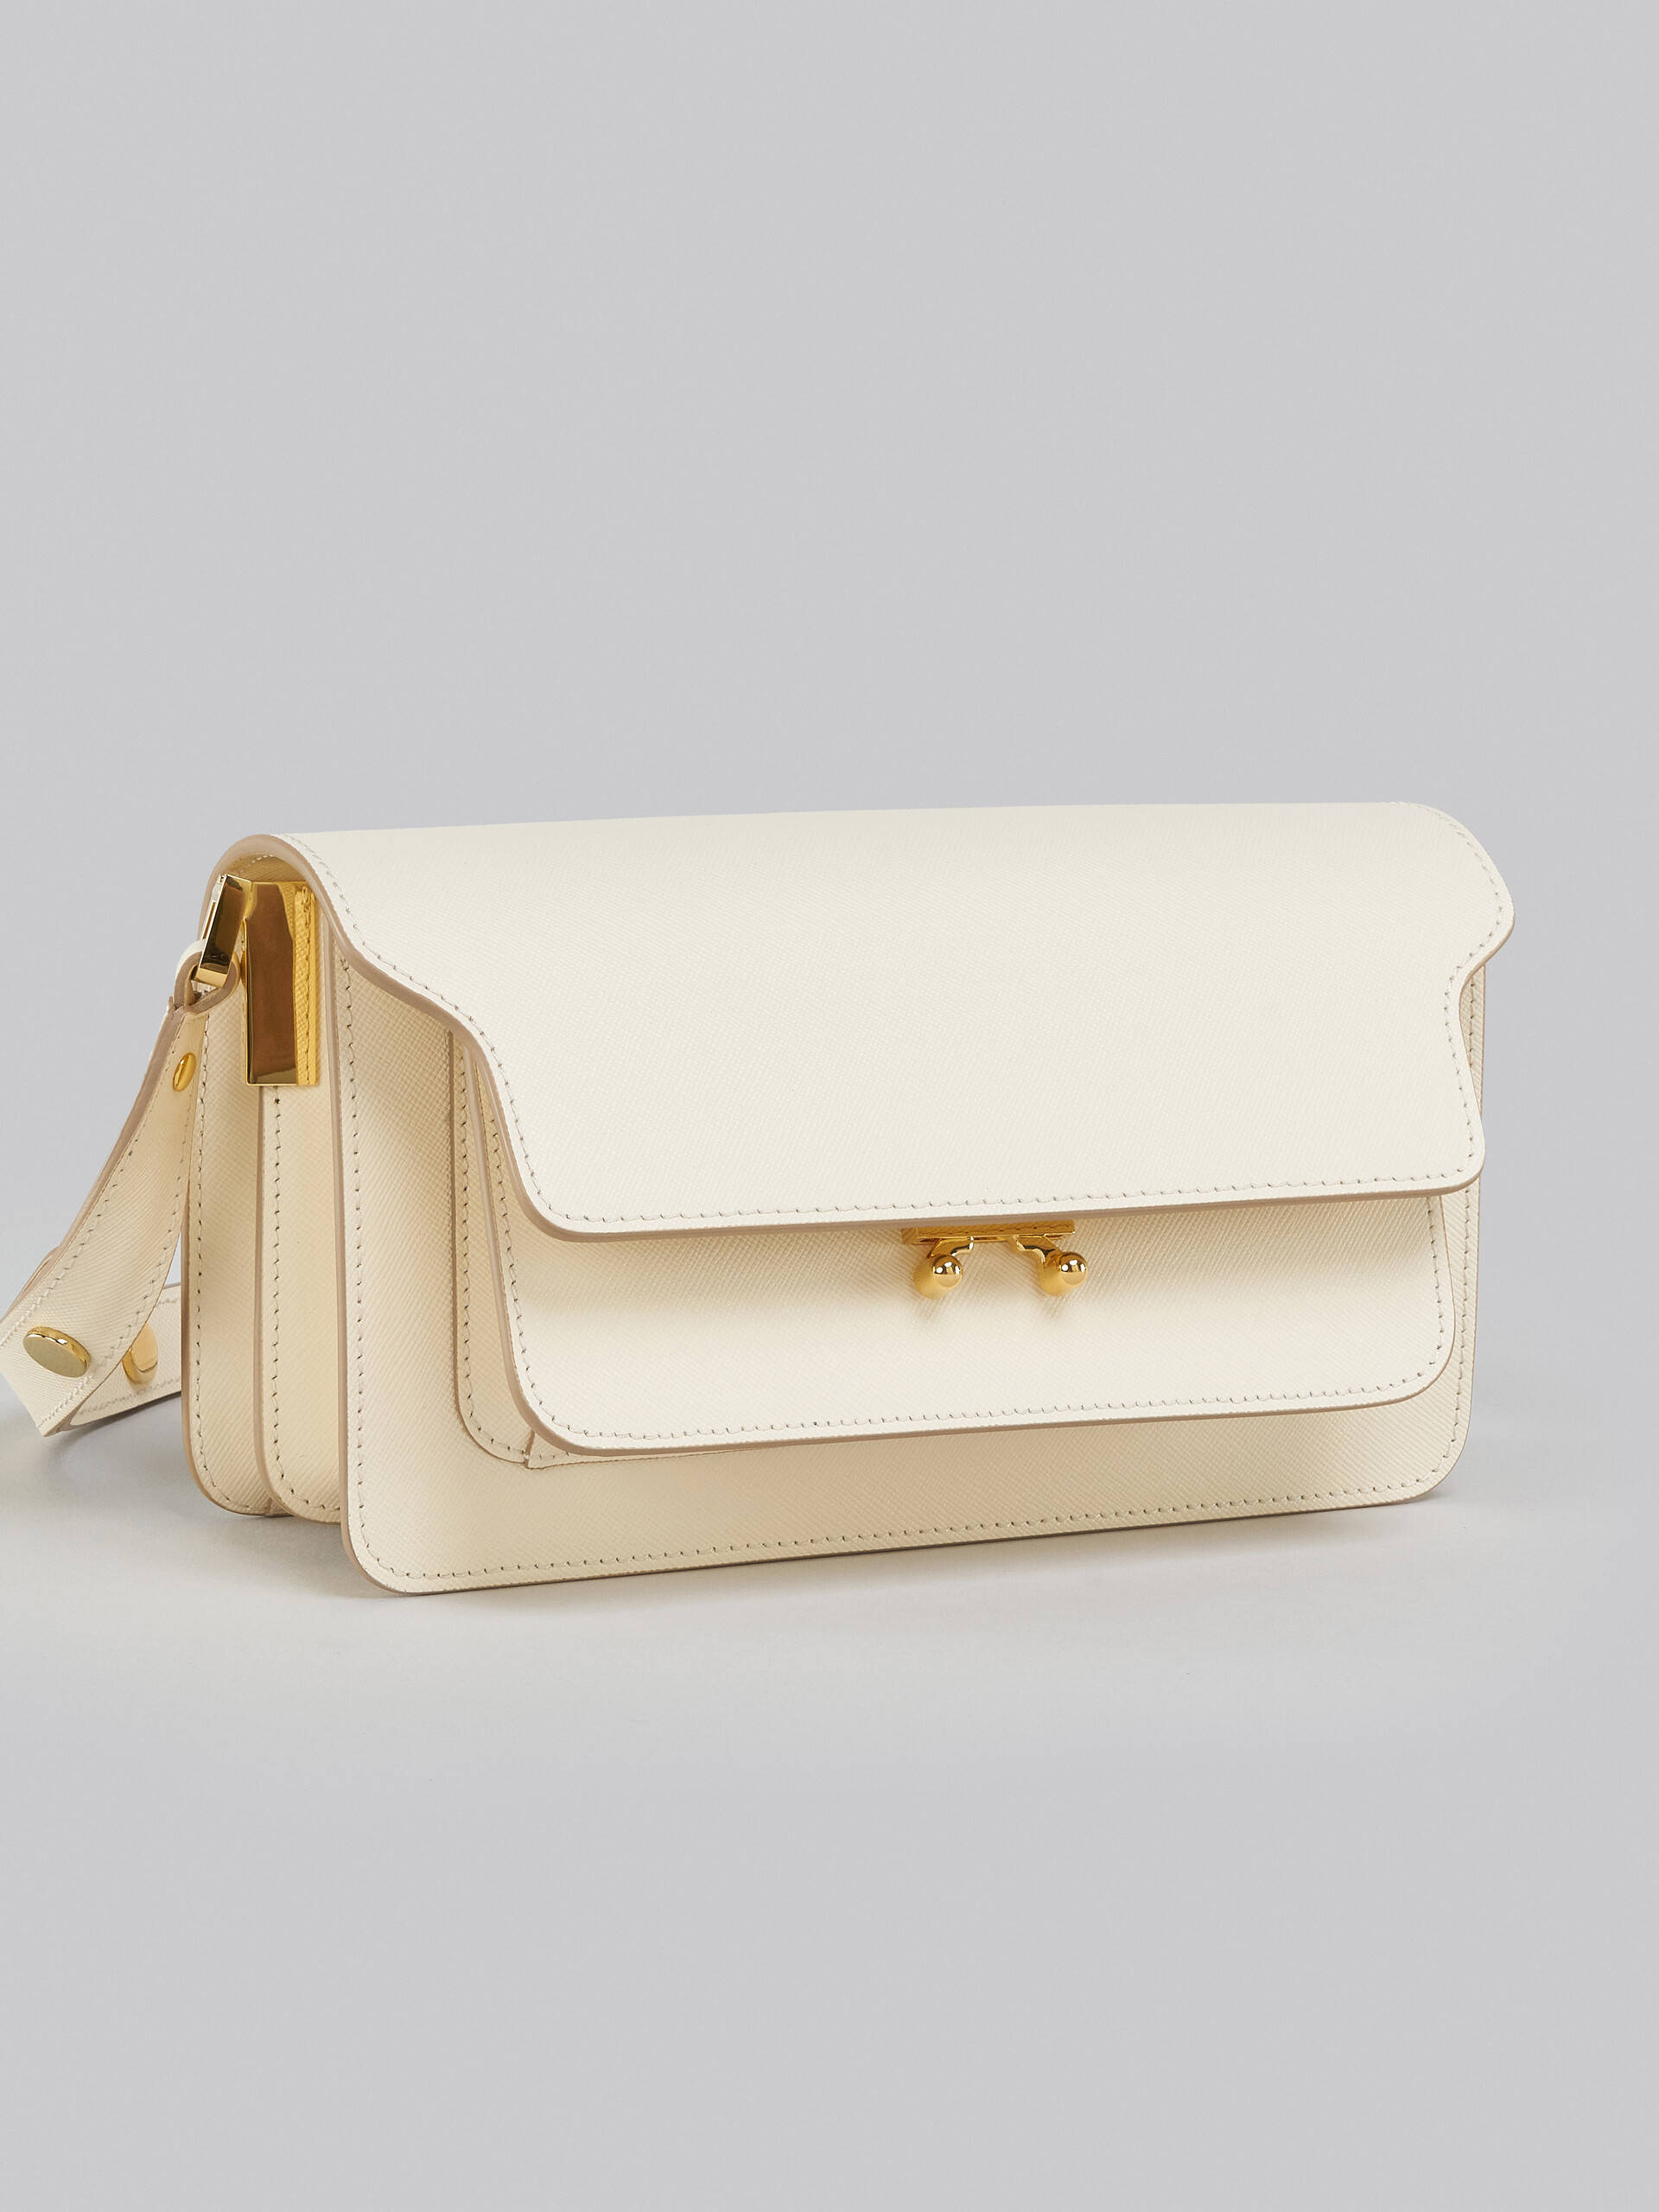 Trunk Bag E/W in white saffiano leather - Shoulder Bags - Image 5